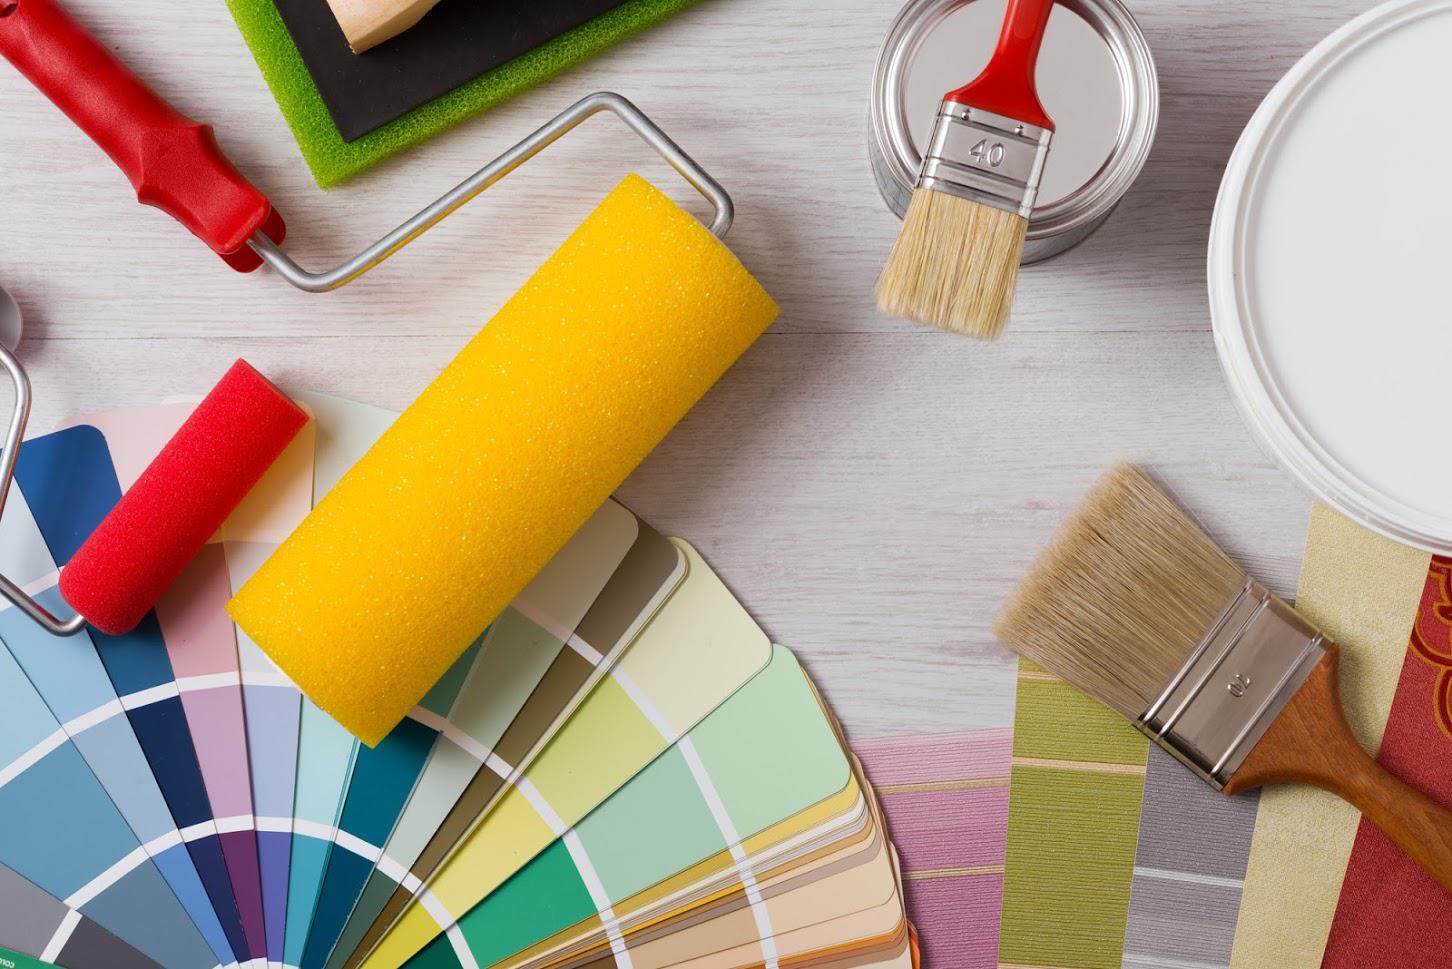 Professional Painting — Different Painting Supplies on Wooden Table in Colorado Springs, CO